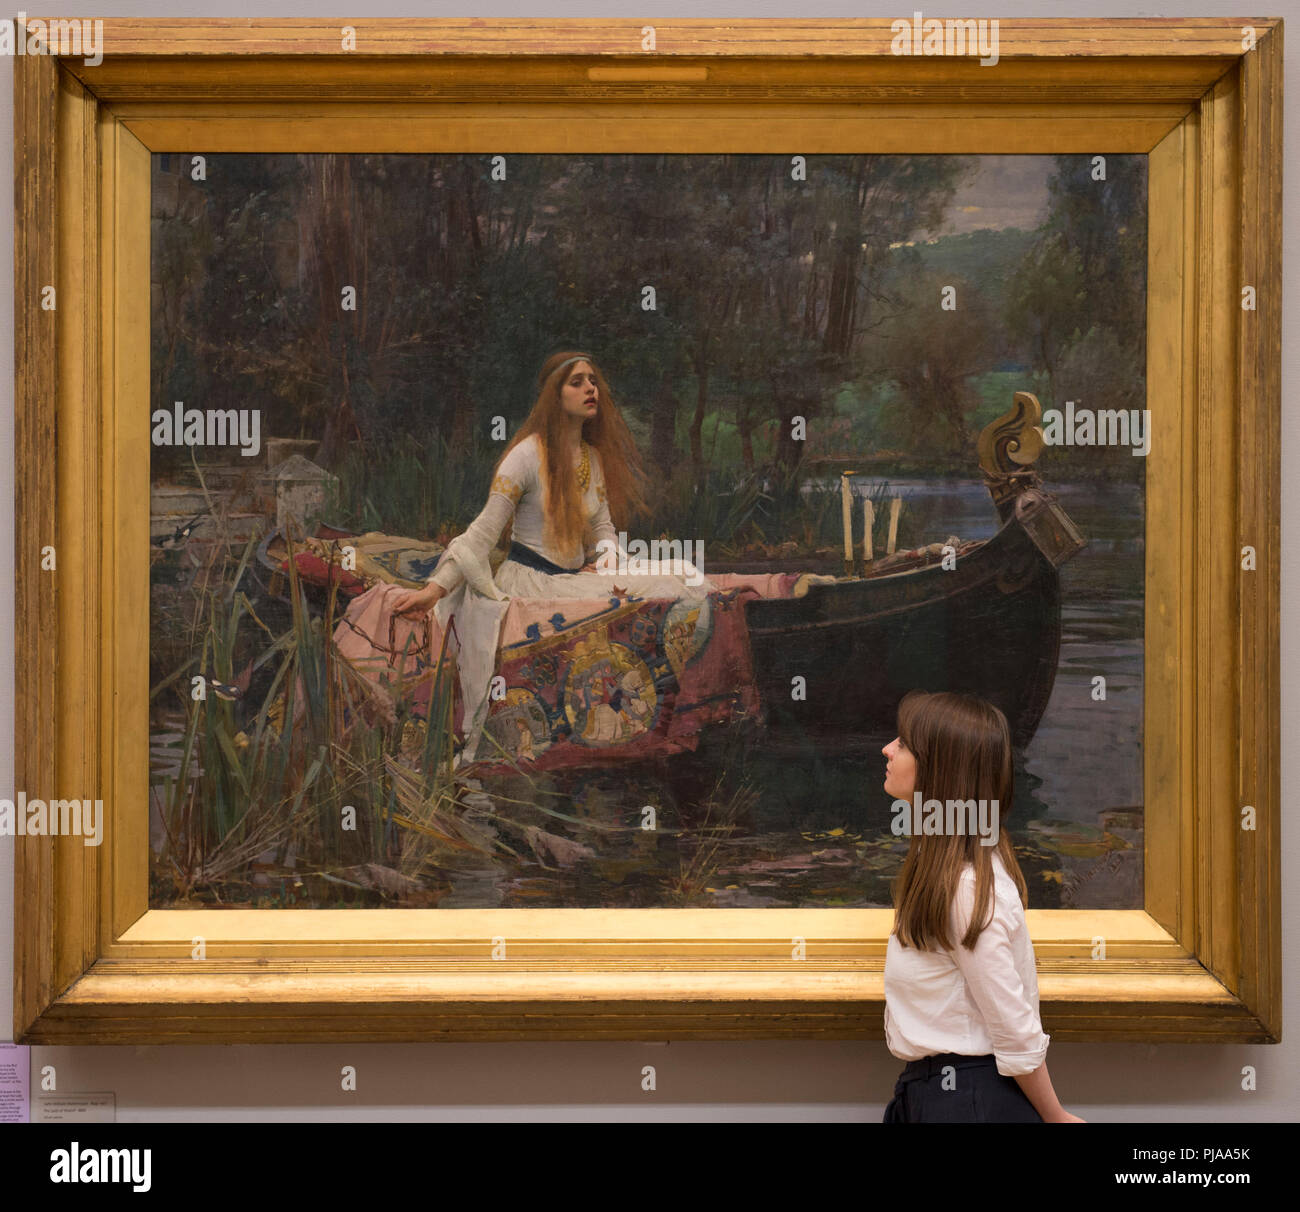 Tate Britain, London, UK. 5 September, 2018. Tate Britain staff with John William Waterhouse’s The Lady of Shalott 1888 to mark the launch of a major new exhibition at the National Gallery of Australia. Over forty works from Tate Britain’s collection of Pre-Raphaelite art will be loaned to the National Gallery of Australia in December for a major new exhibition. Credit: Malcolm Park/Alamy Live News. Stock Photo